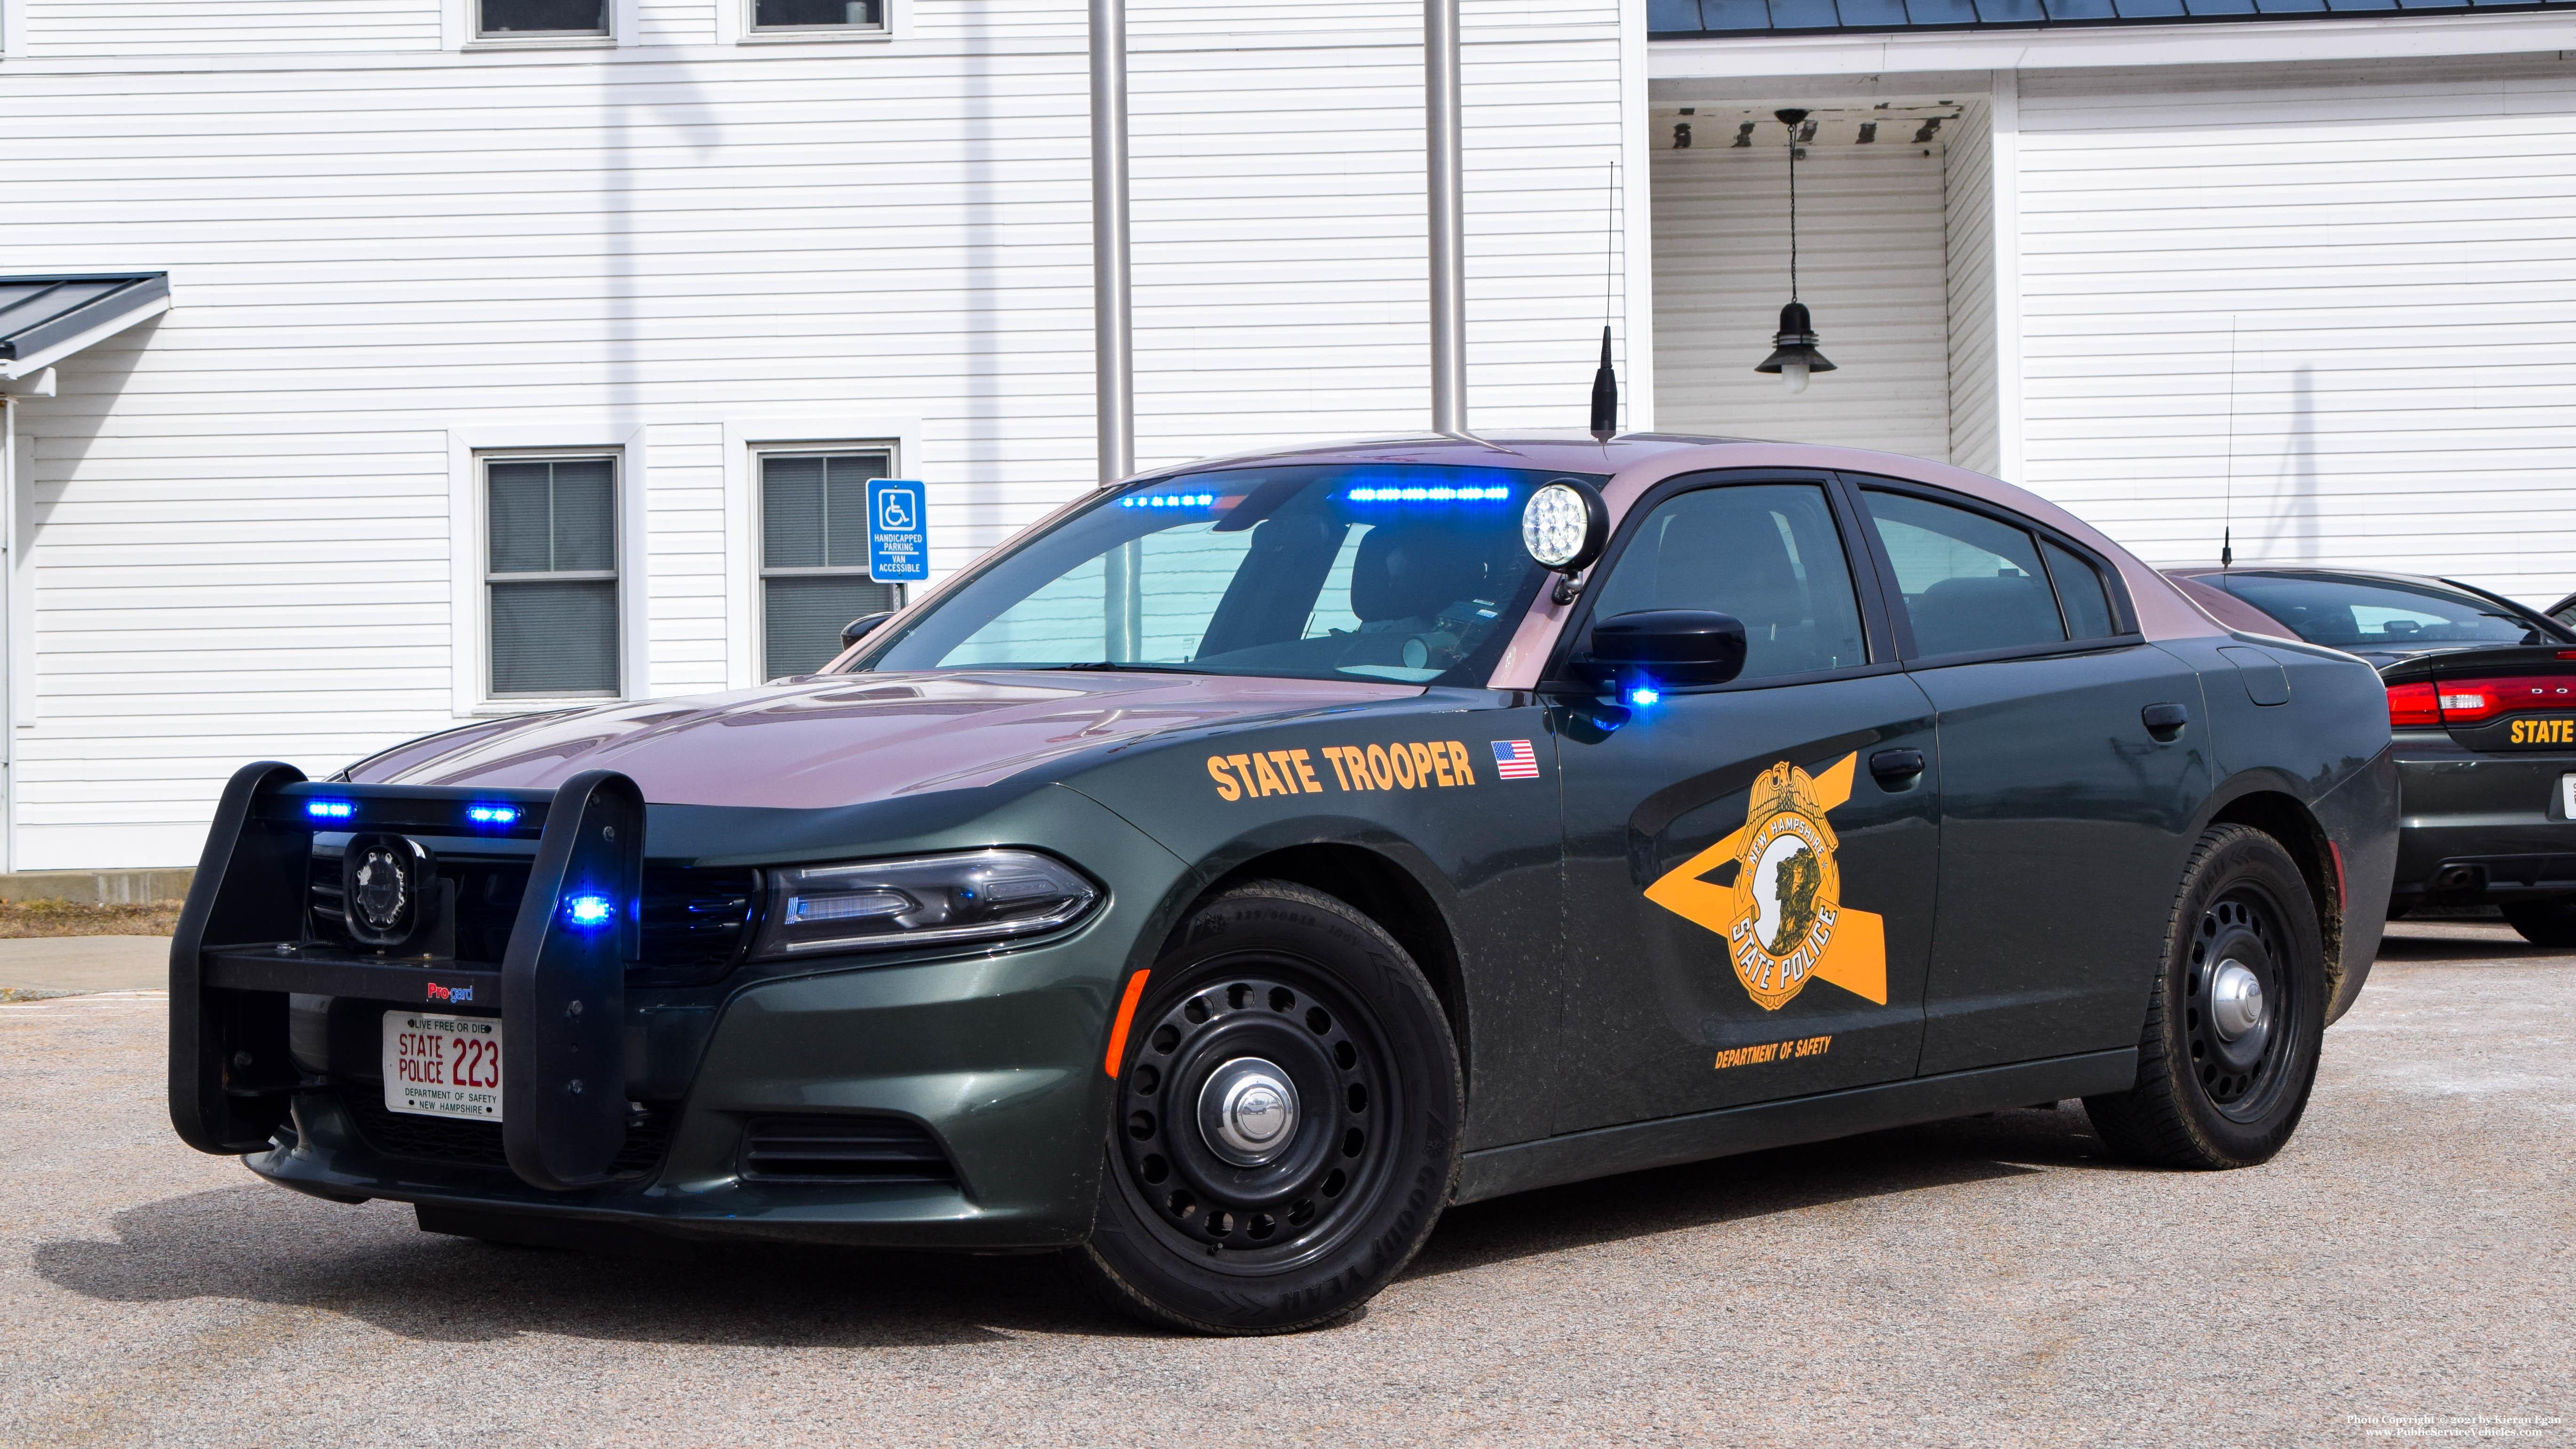 A photo  of New Hampshire State Police
            Cruiser 223, a 2018 Dodge Charger             taken by Kieran Egan